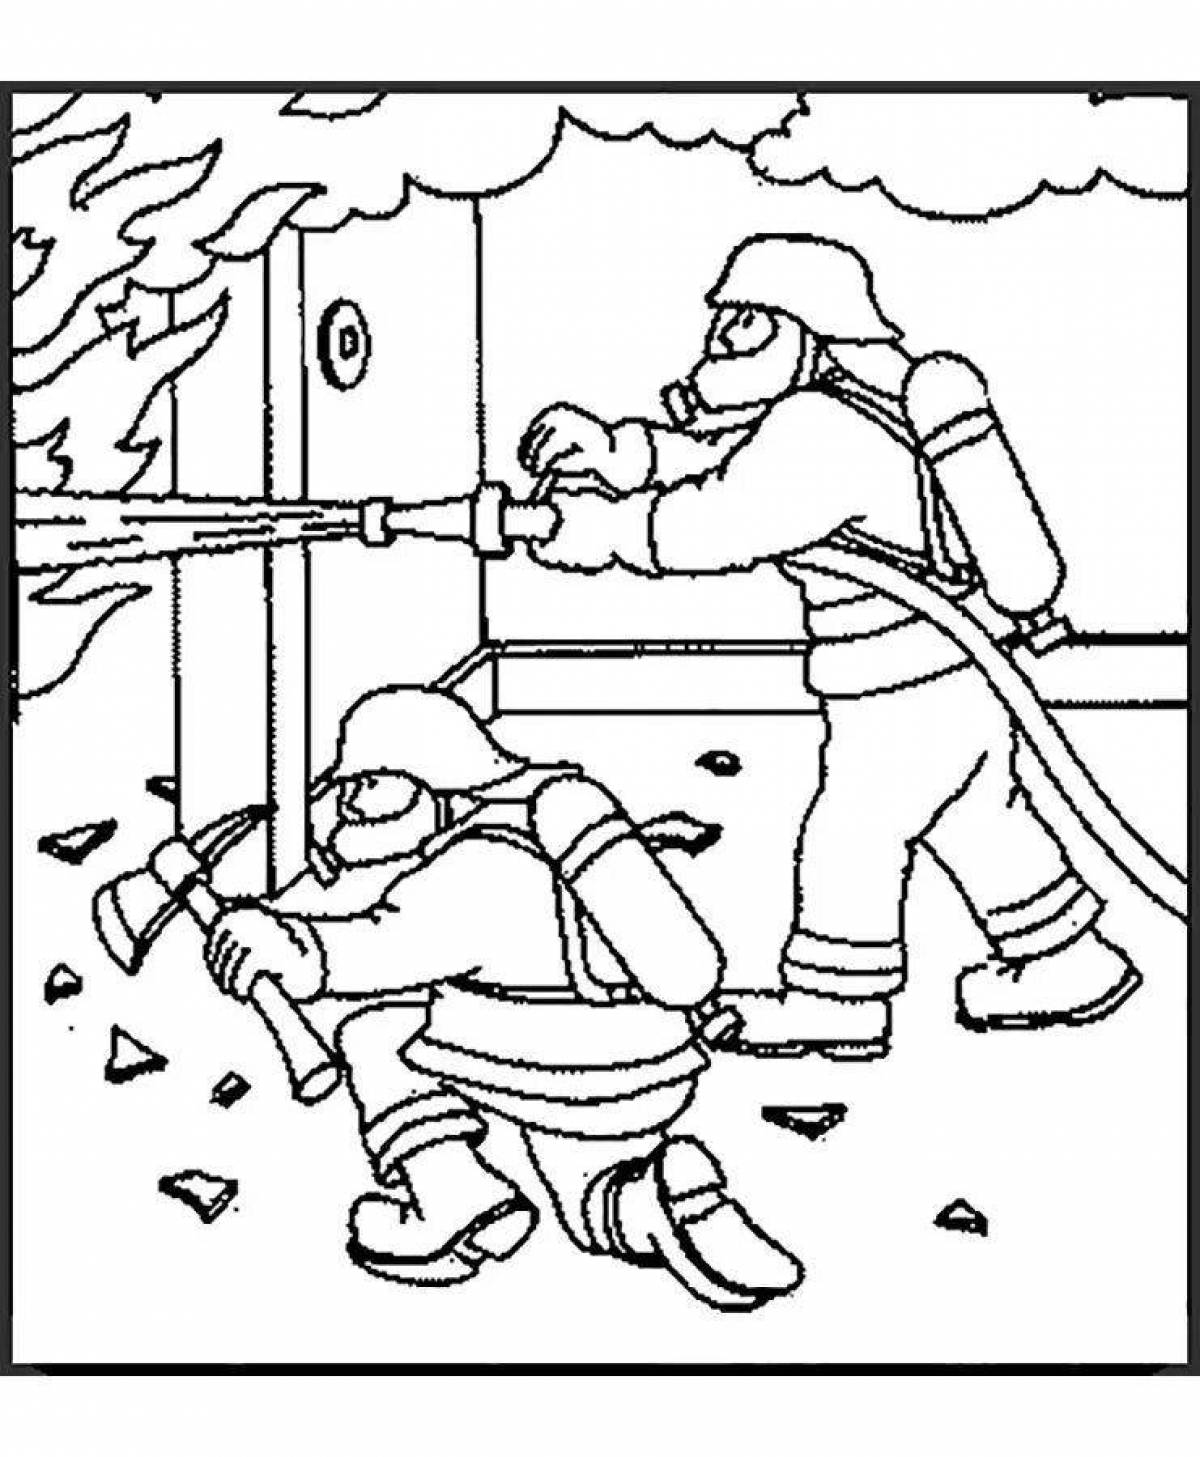 Joyful fire safety coloring page